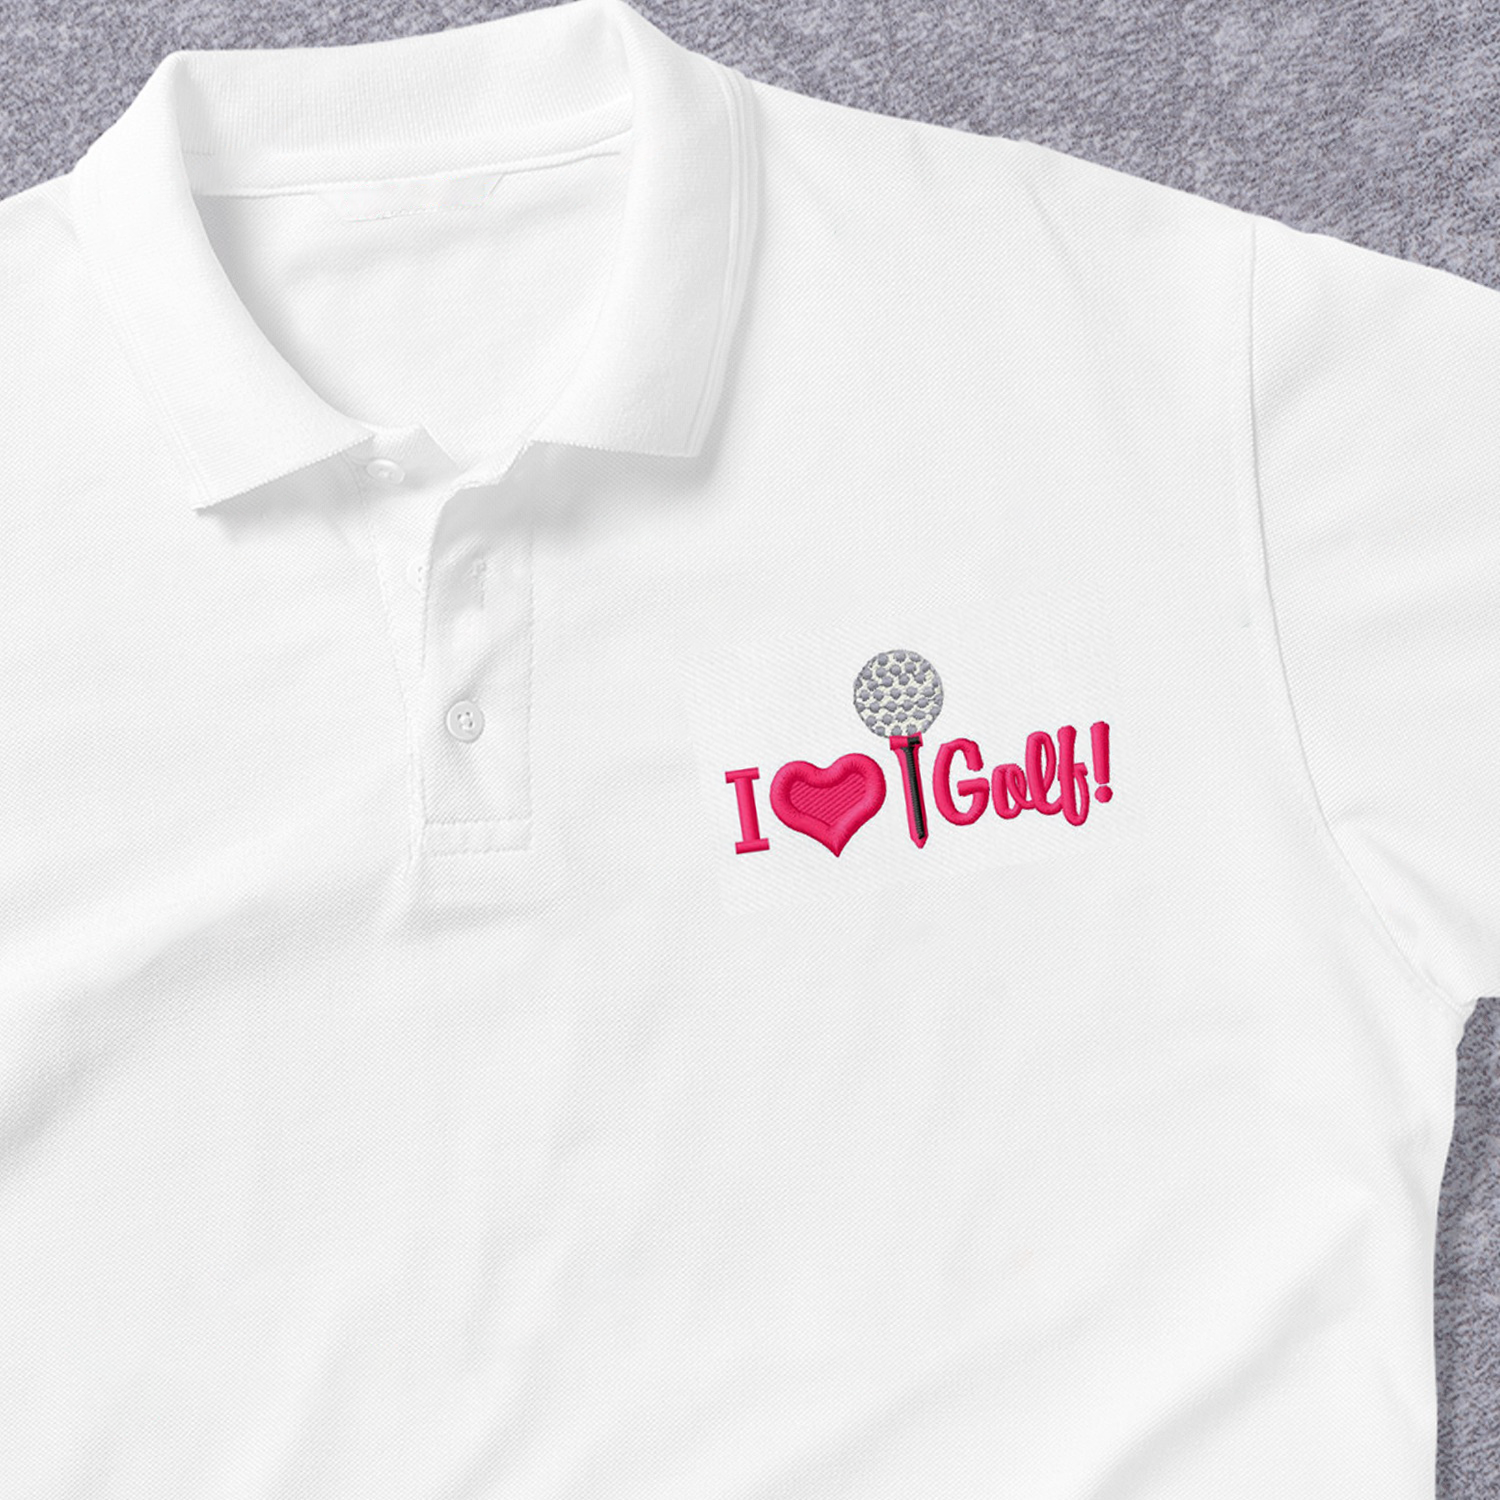 Love Golfing Embroidery Polo Shirts For Women Or Men/ I Love You Golf Shirt